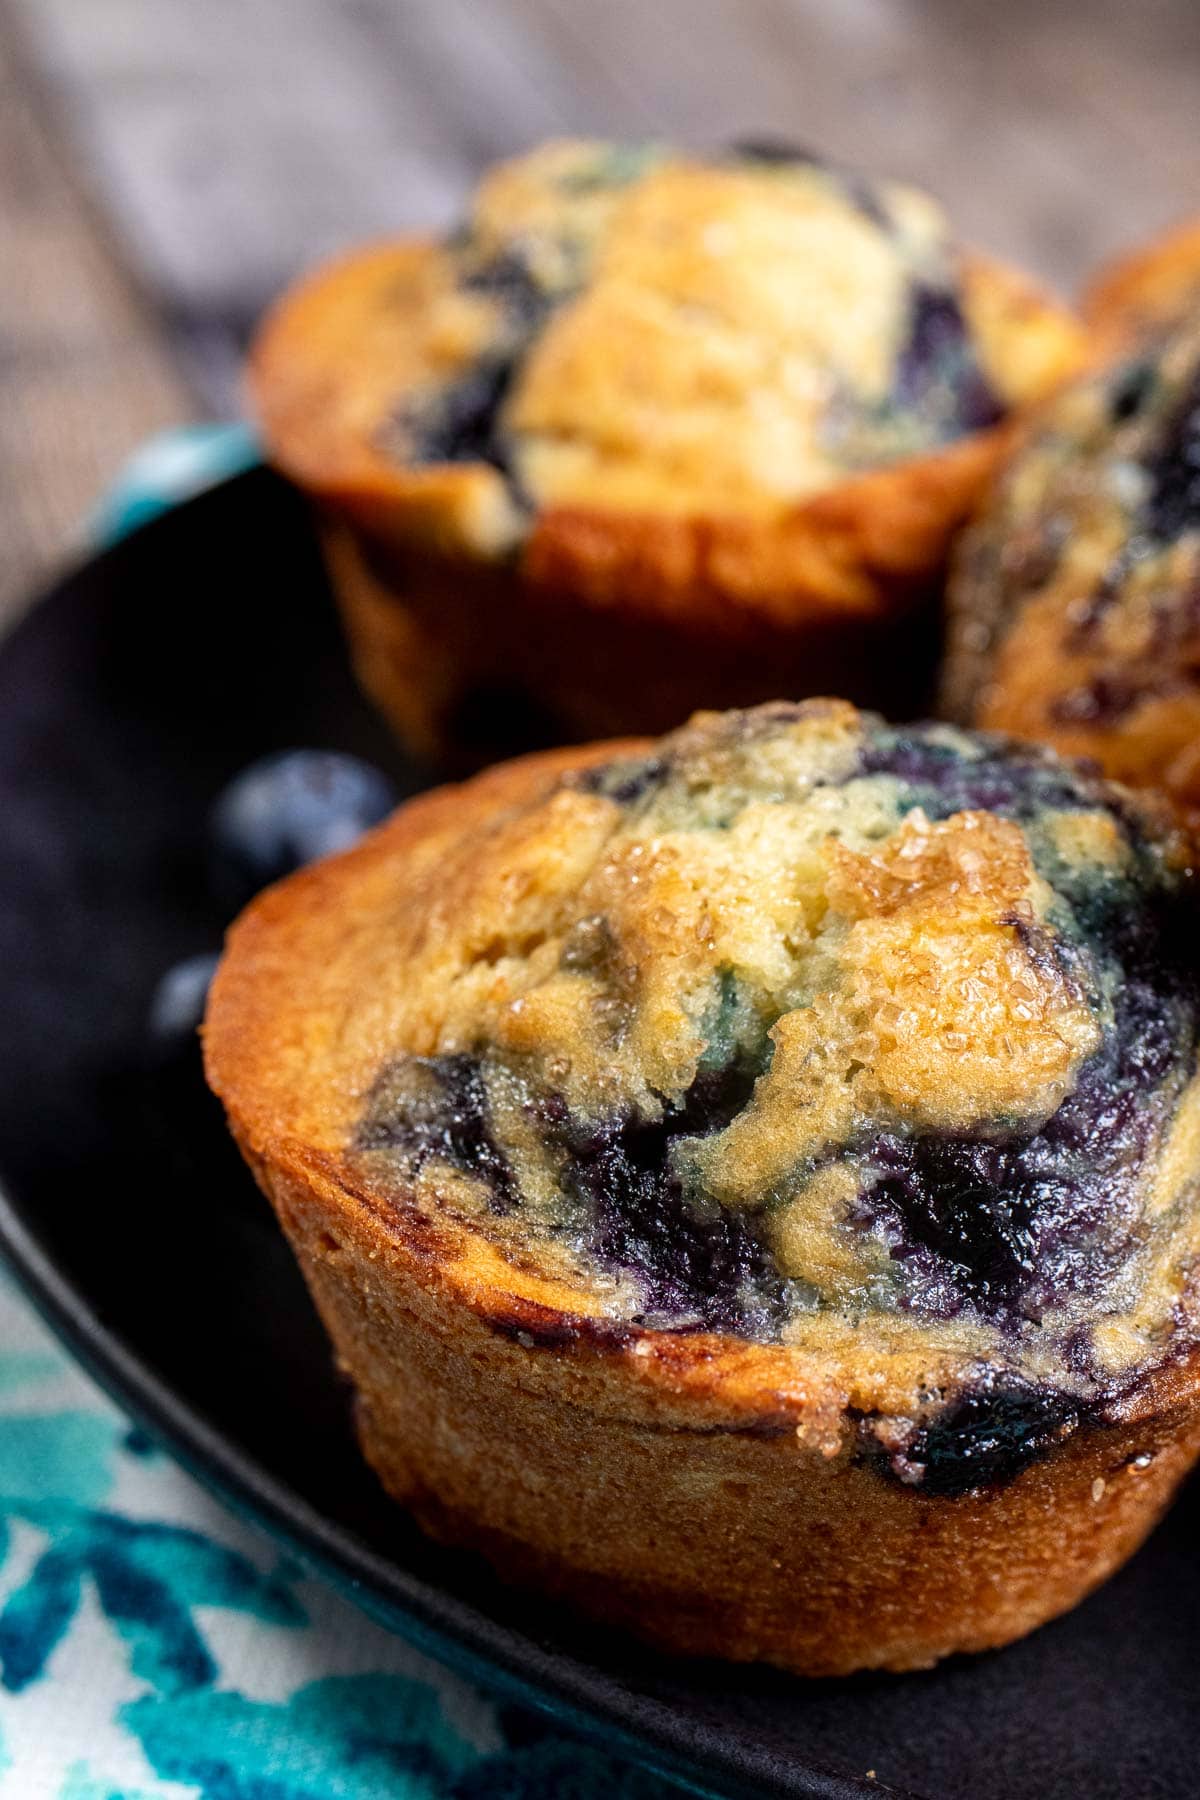 Side view of a black plate on a blue and white cloth with a pile of blueberry swirl muffins on top.